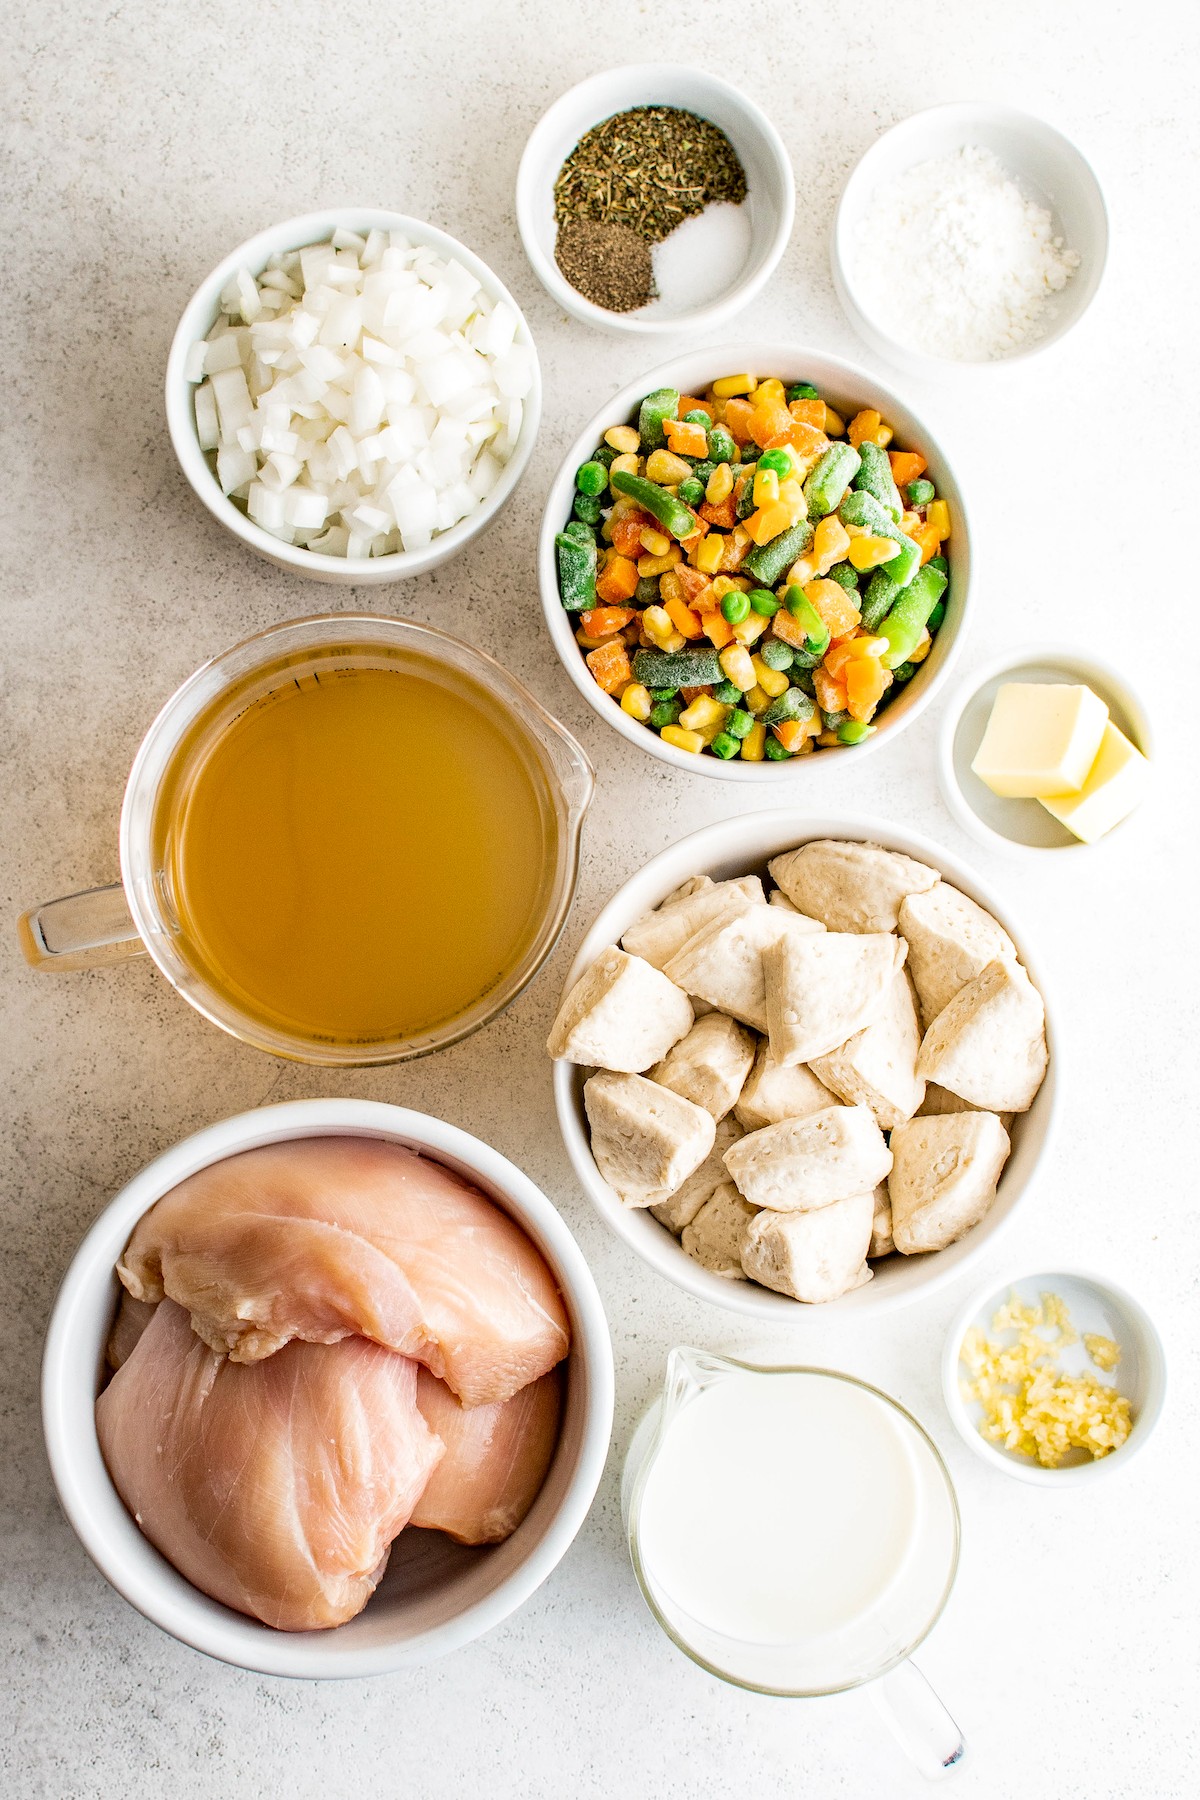 From top: Seasonings, cornstarch, frozen vegetables, butter, canned biscuits cut into pieces, garlic, evaporated milk, raw chicken breast, chicken broth, white onion.